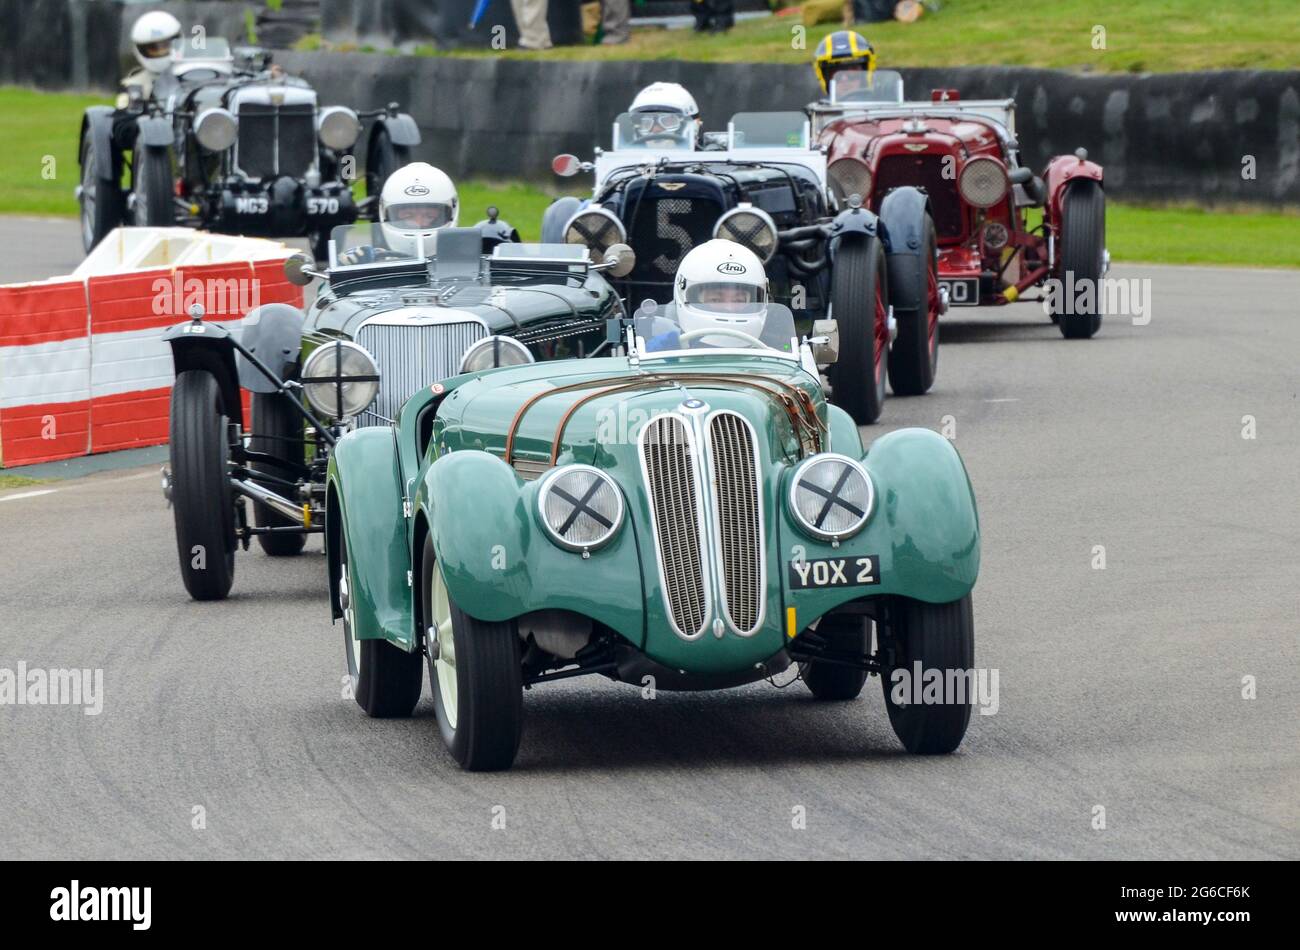 BMW 328 classic, vintage racing car competing in the Brooklands Trophy at the Goodwood Revival historic event, UK. Driven by David Cottingham Stock Photo